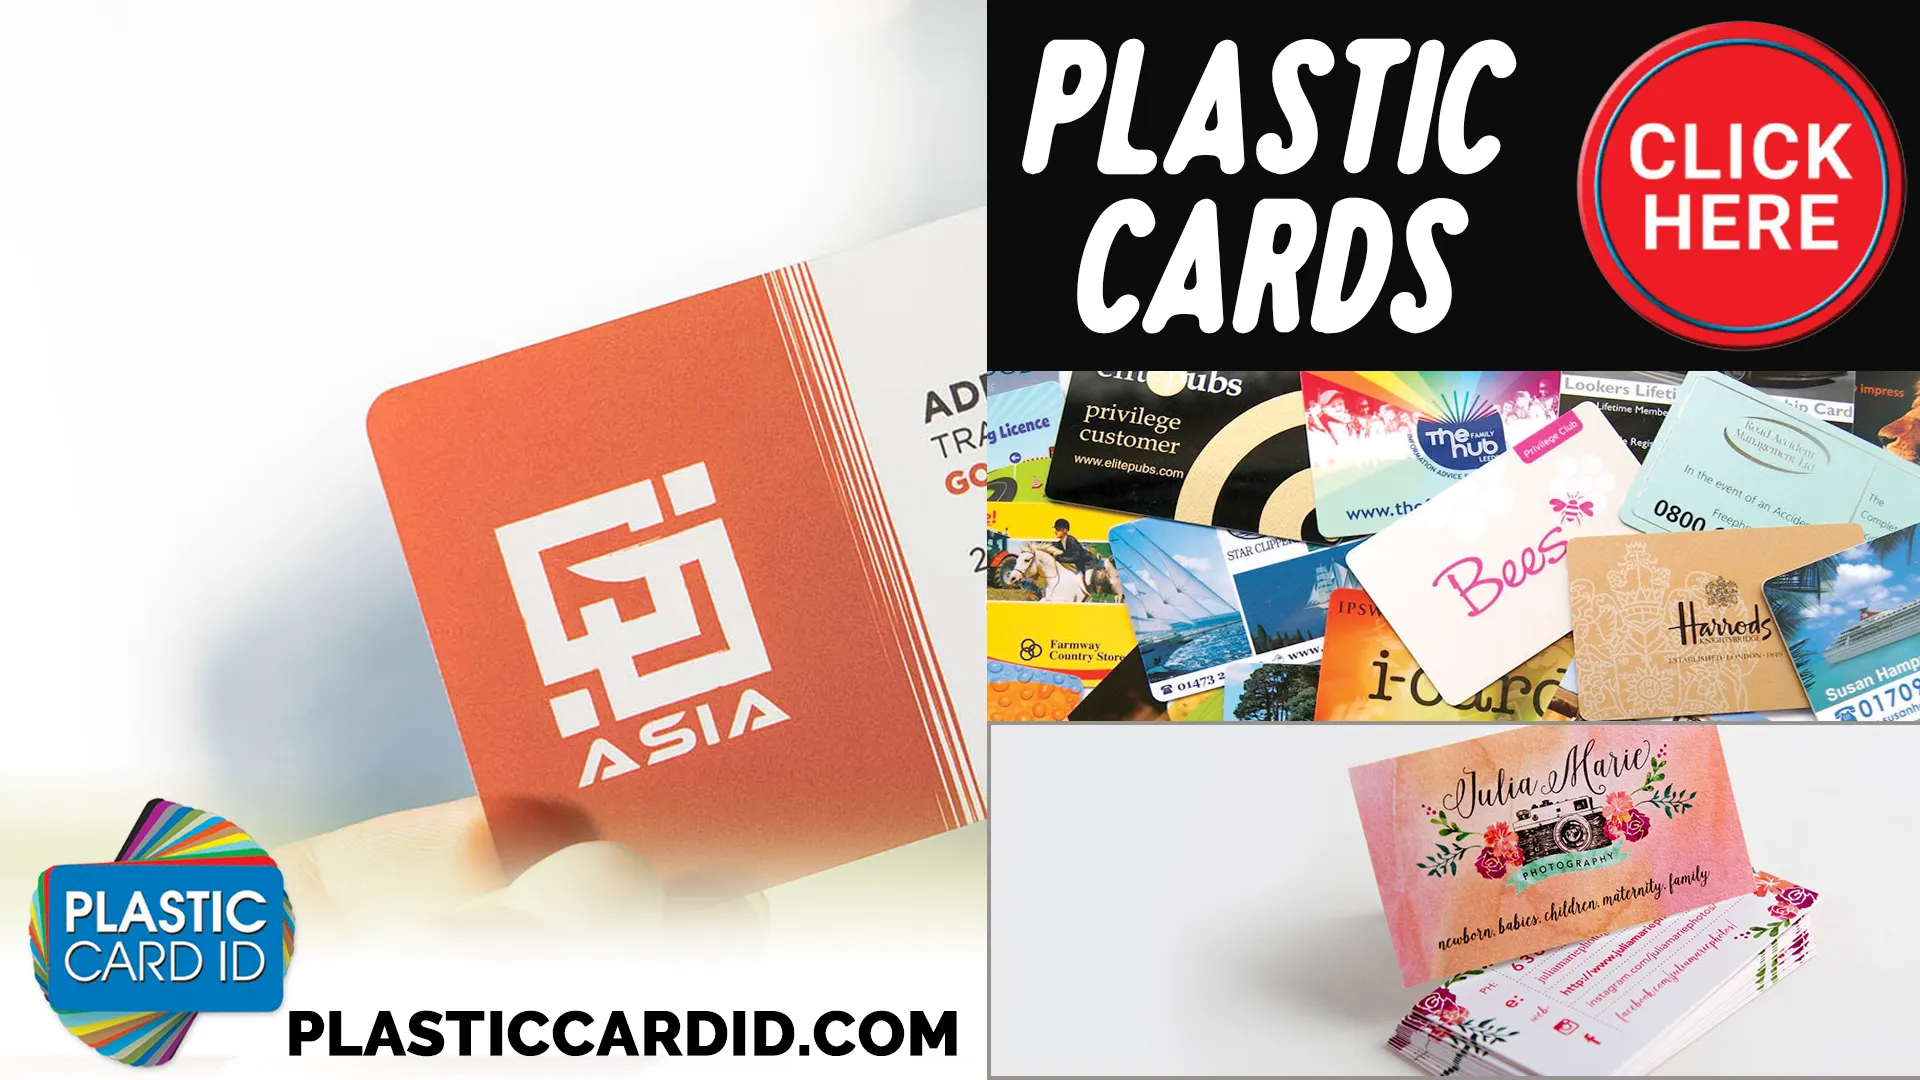 Welcome to the Secure World of Plastic Cards